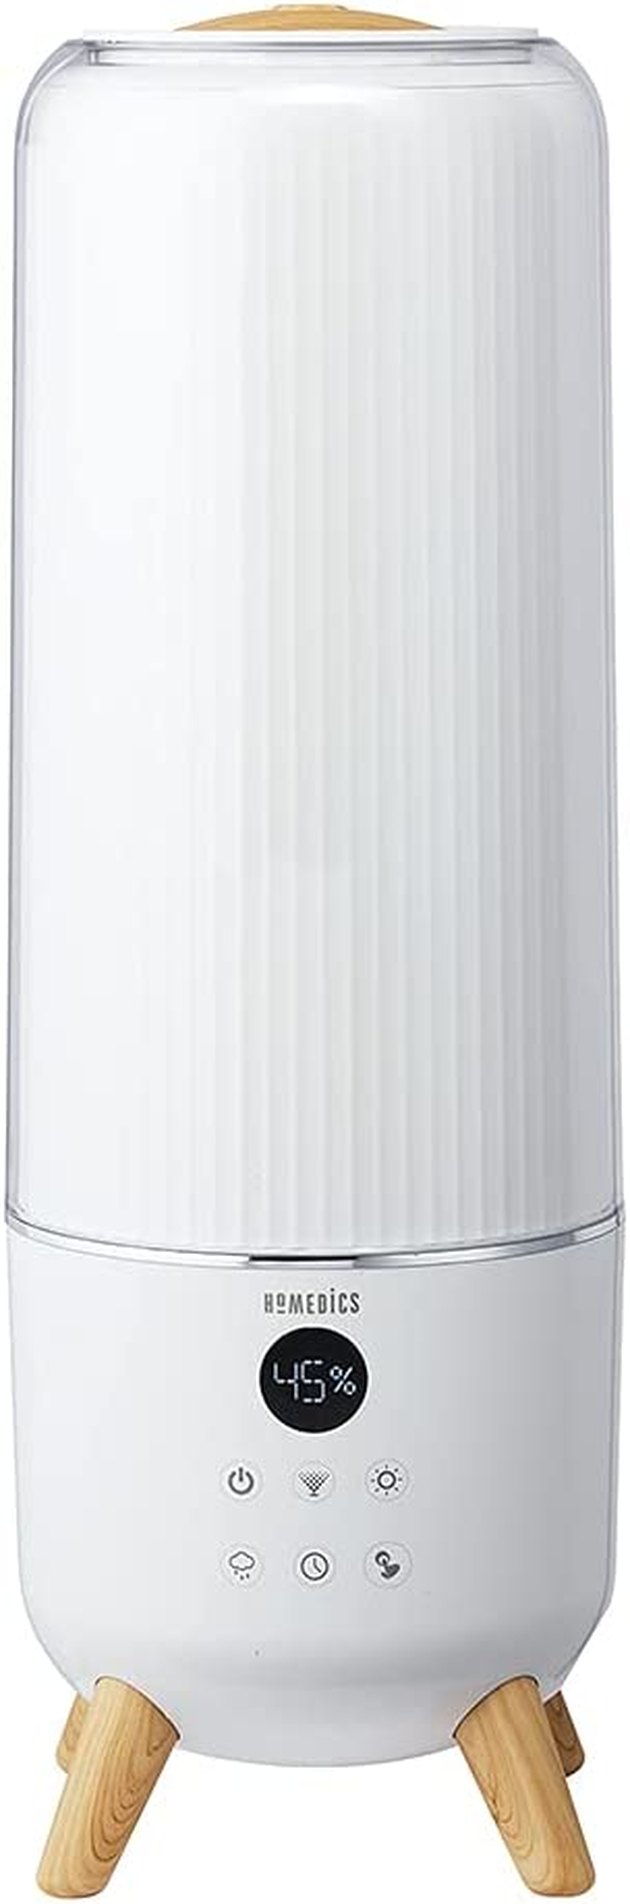 Give your space a modern edge all while getting the benefits of a humidifier with this stylish pick. With a tower-like design paired with silver and wood finish accents, it will blend in with your home decor seamlessly. Not to mention, it's perfect for large rooms and can cover up to 426 square feet with a cool mist.